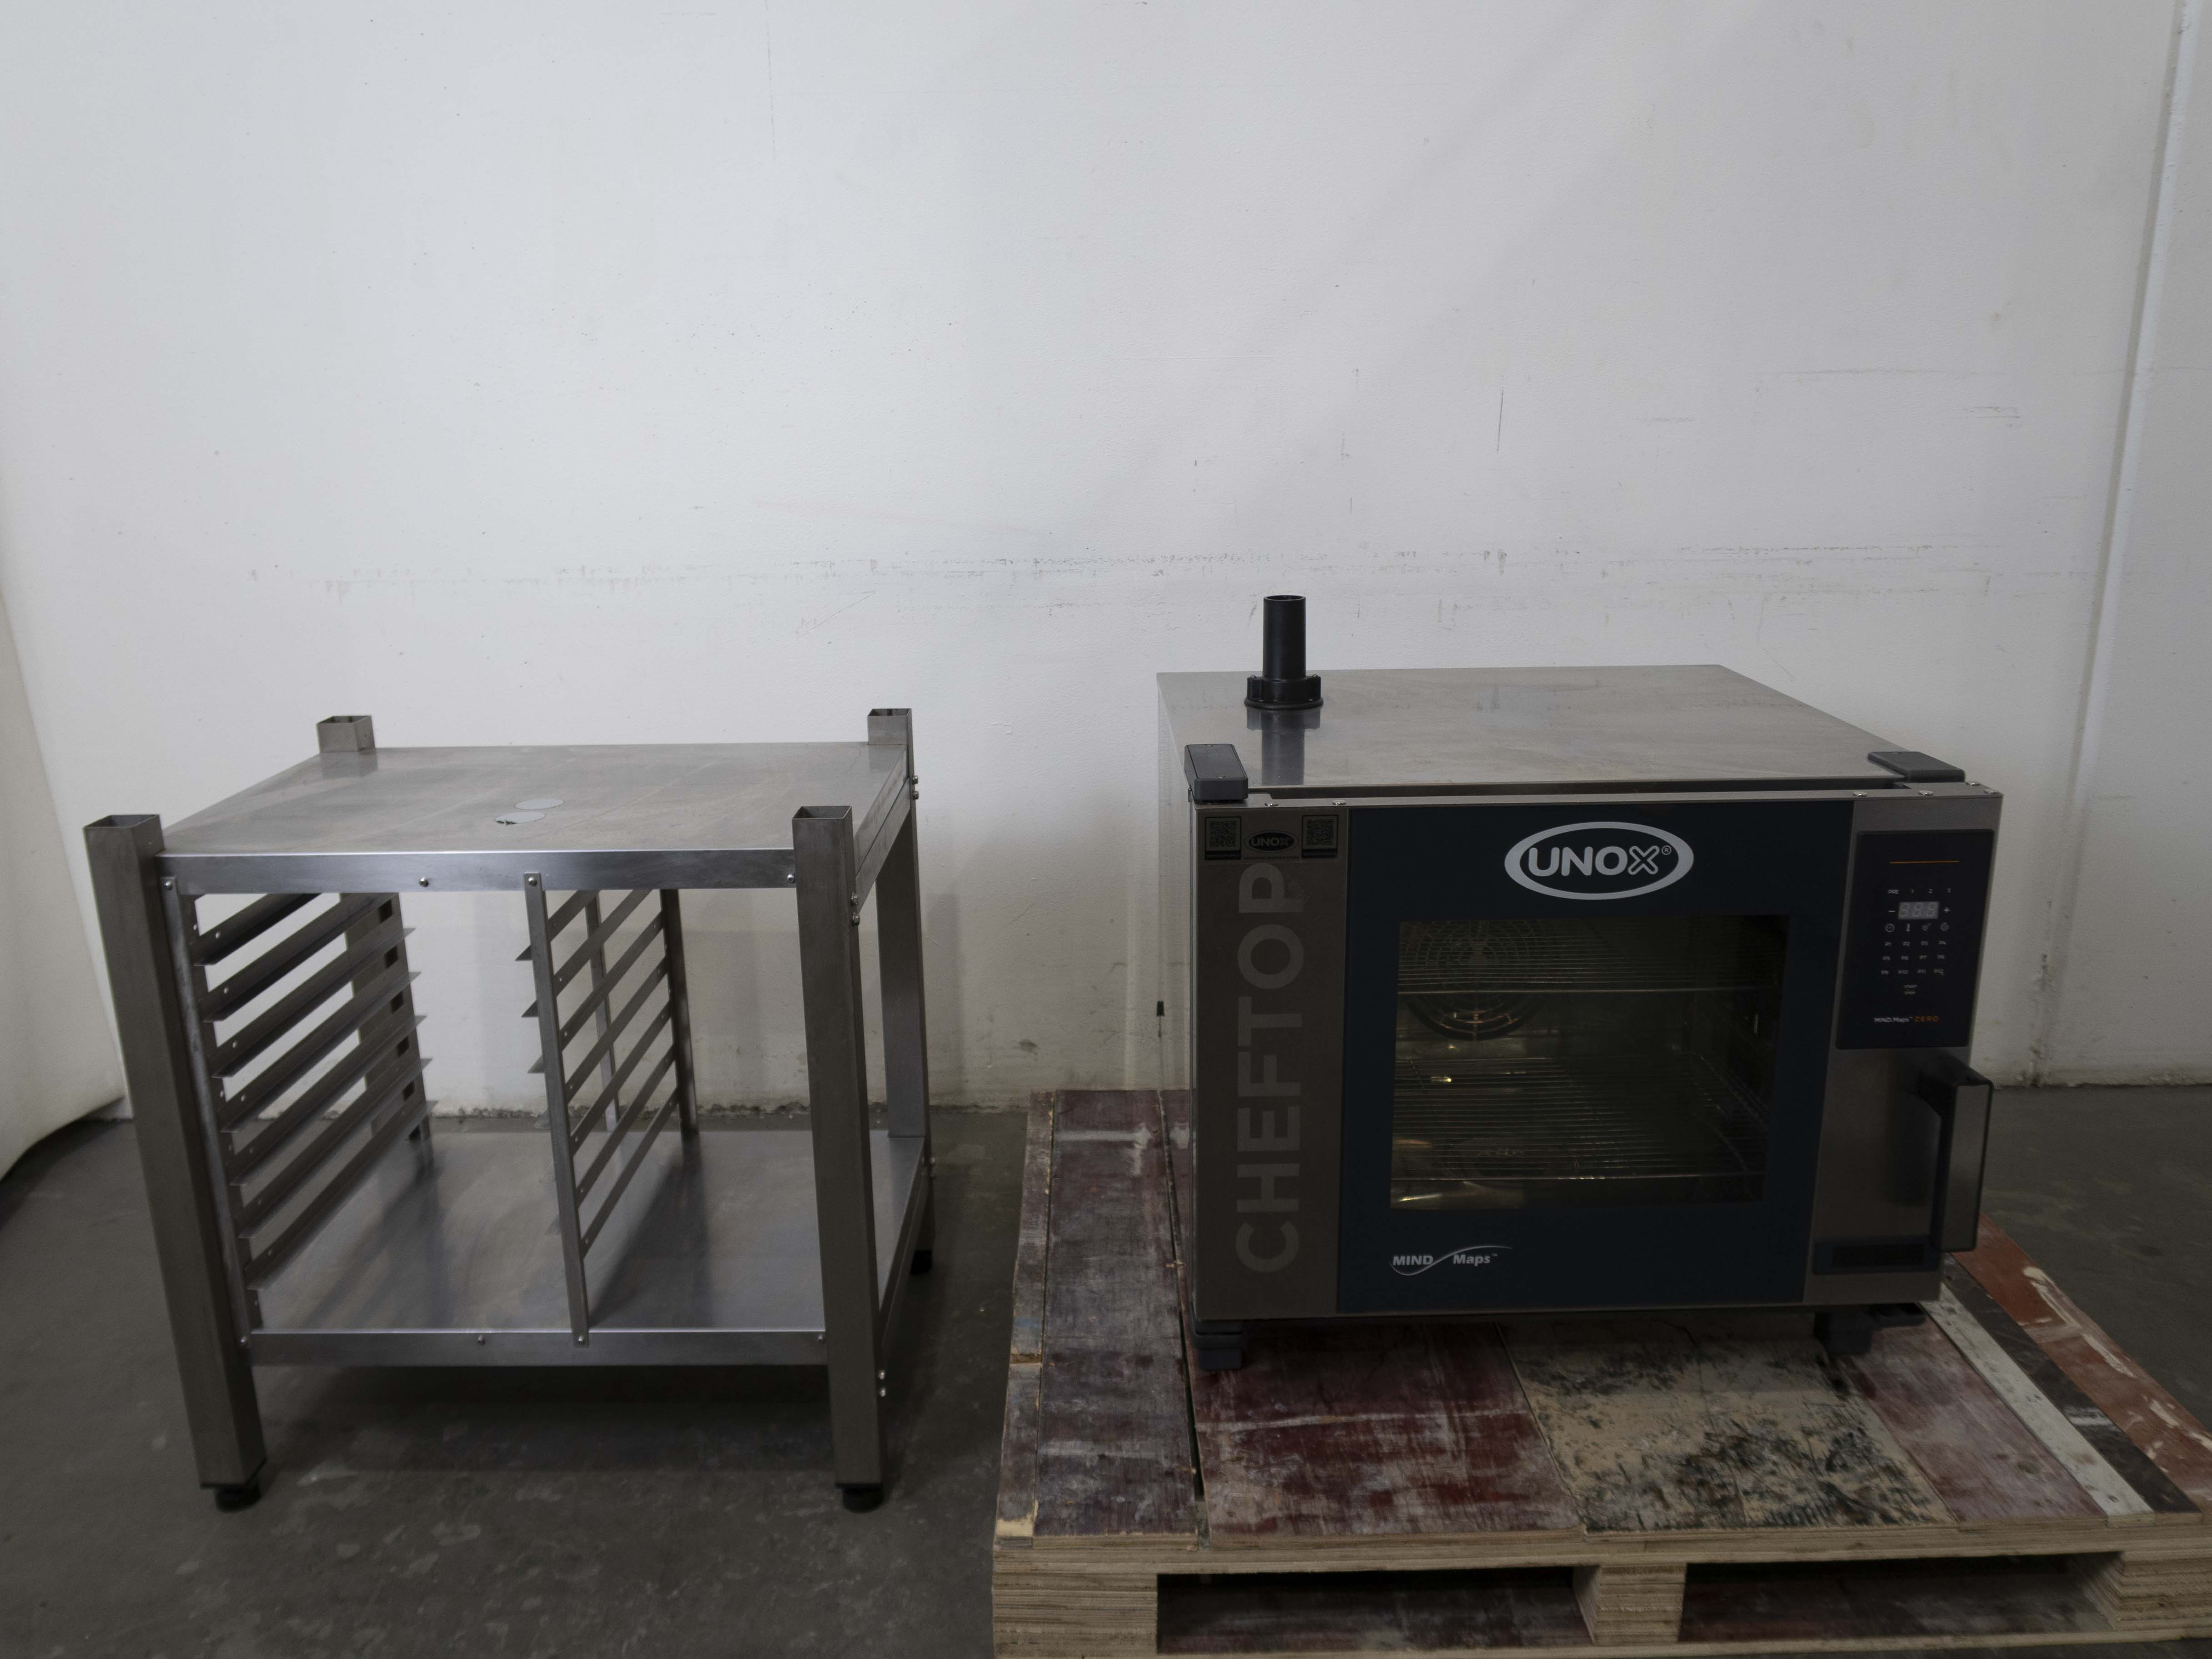 Thumbnail - Unox XEVC-511-EZRM-LP.0 Combi Oven with Stand